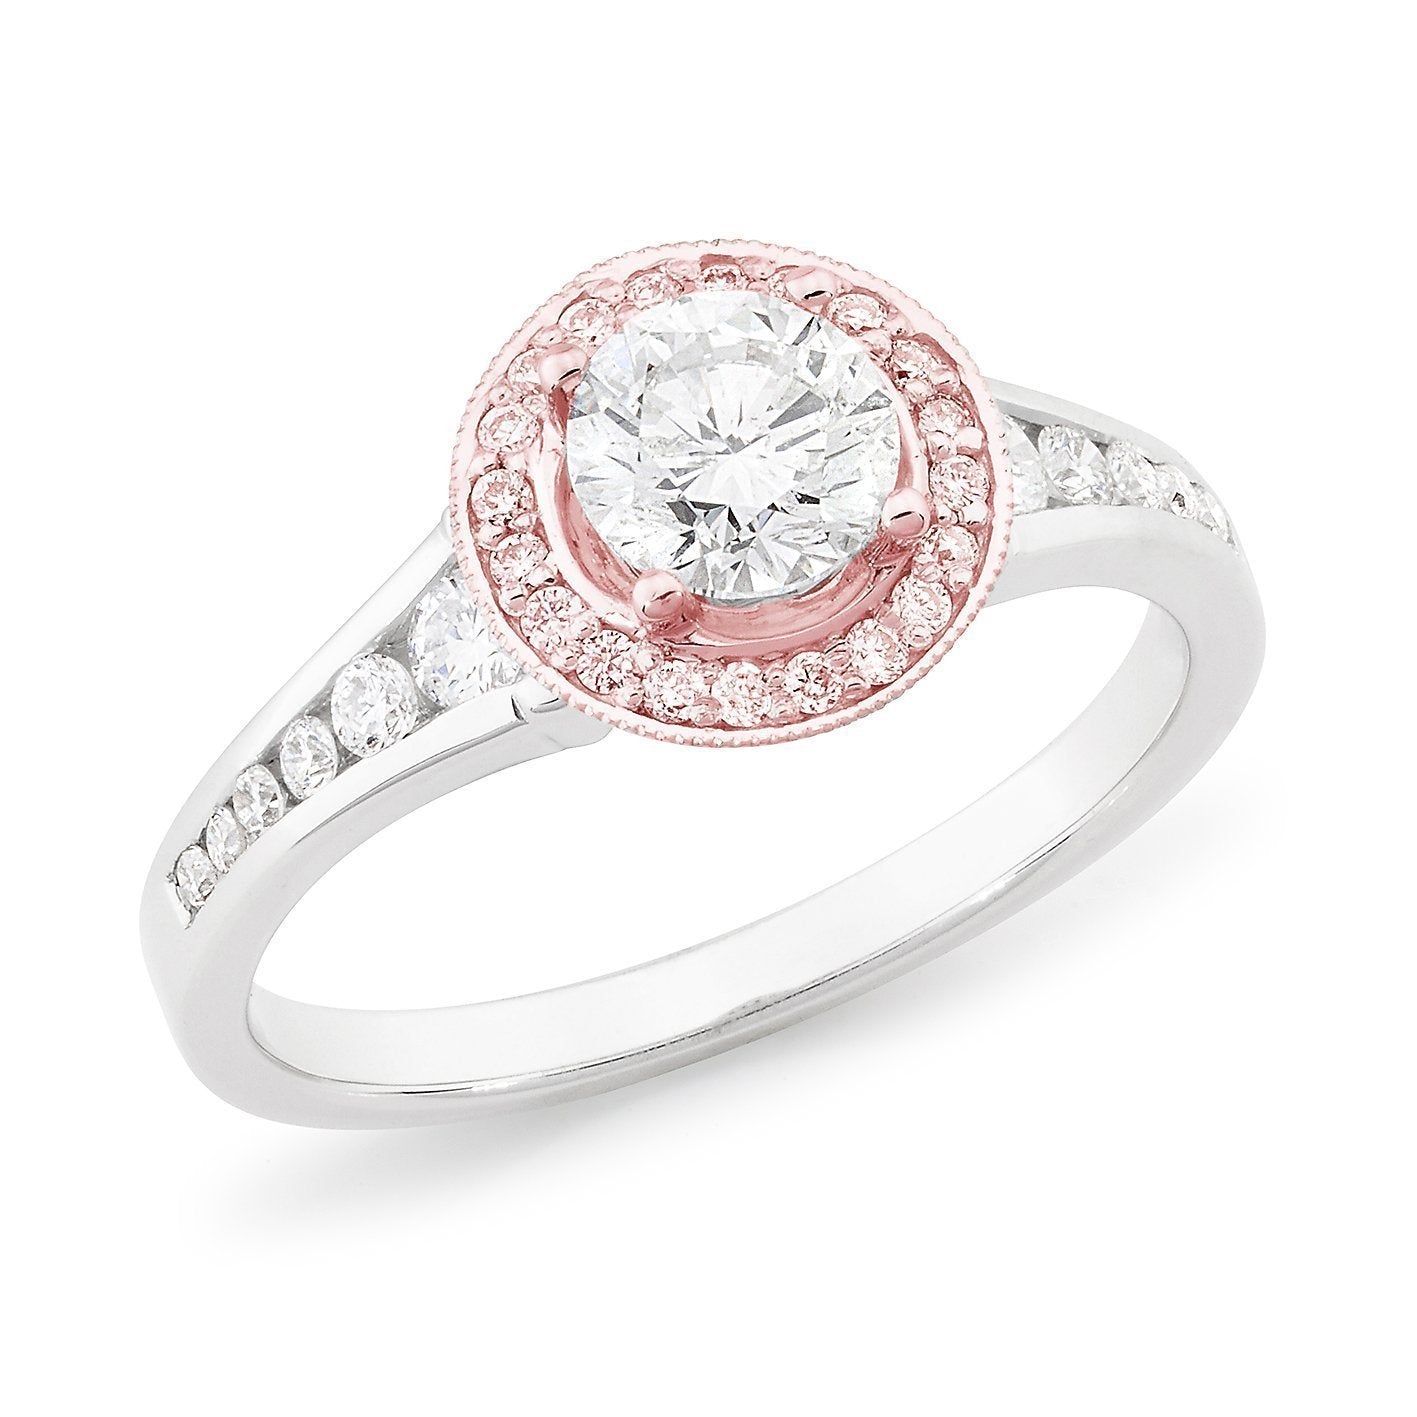 PINK CAVIAR 1.04ct White Round Brilliant & Pink Diamond Engagement Ring in 18ct White Gold